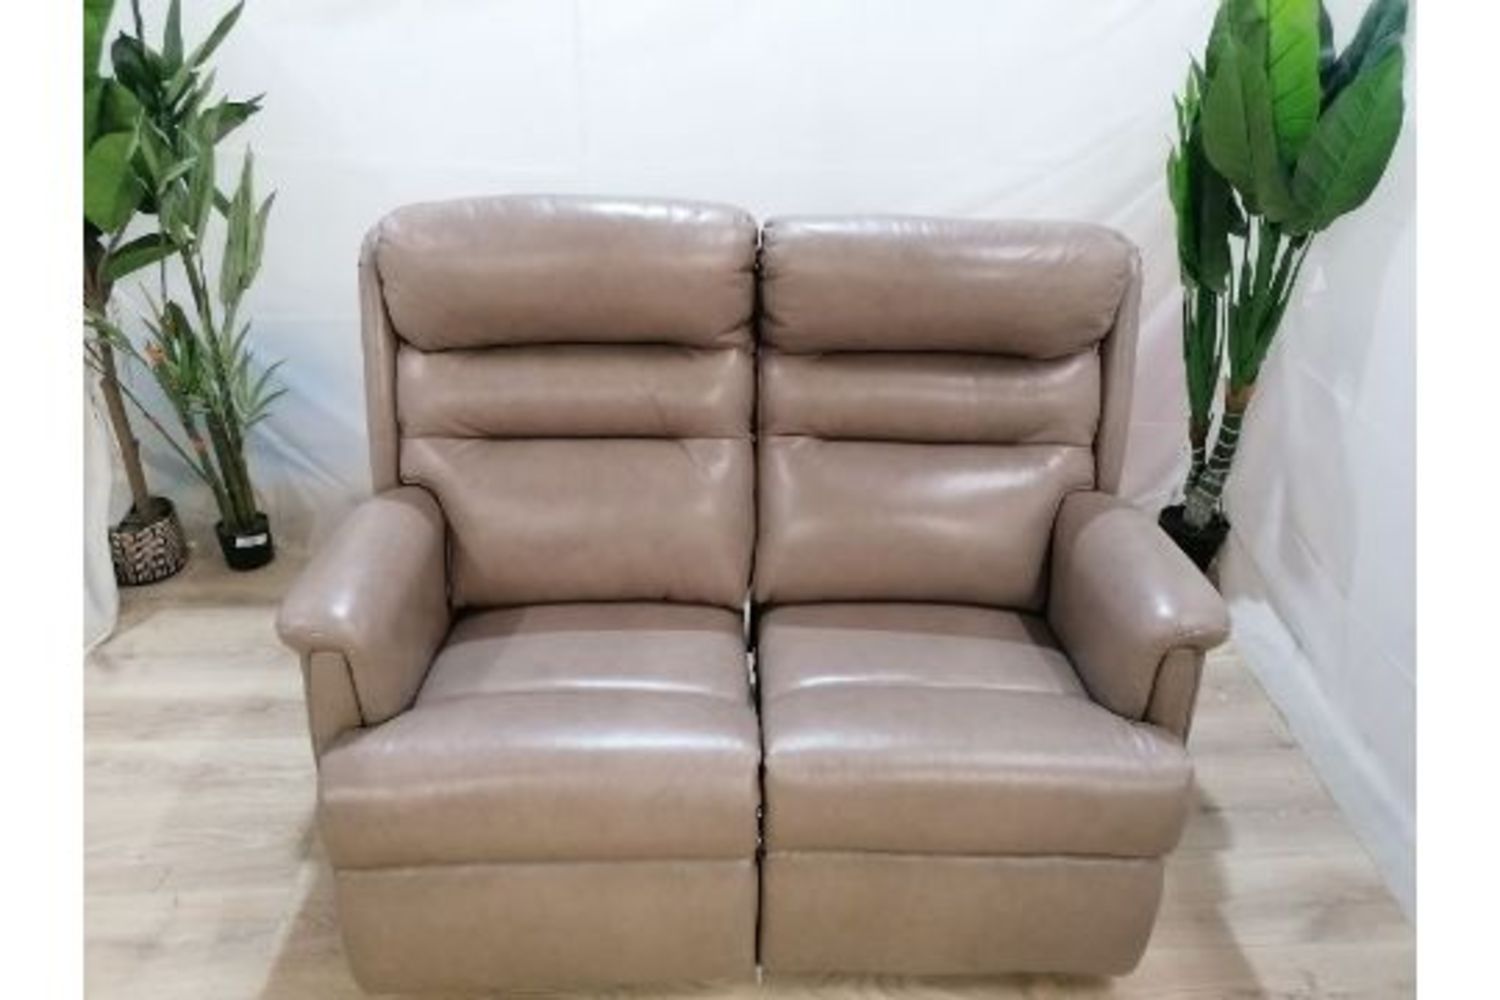 New delivery of Sofas, Armchairs from Costco, Swoon, Oak Furnitureland and more